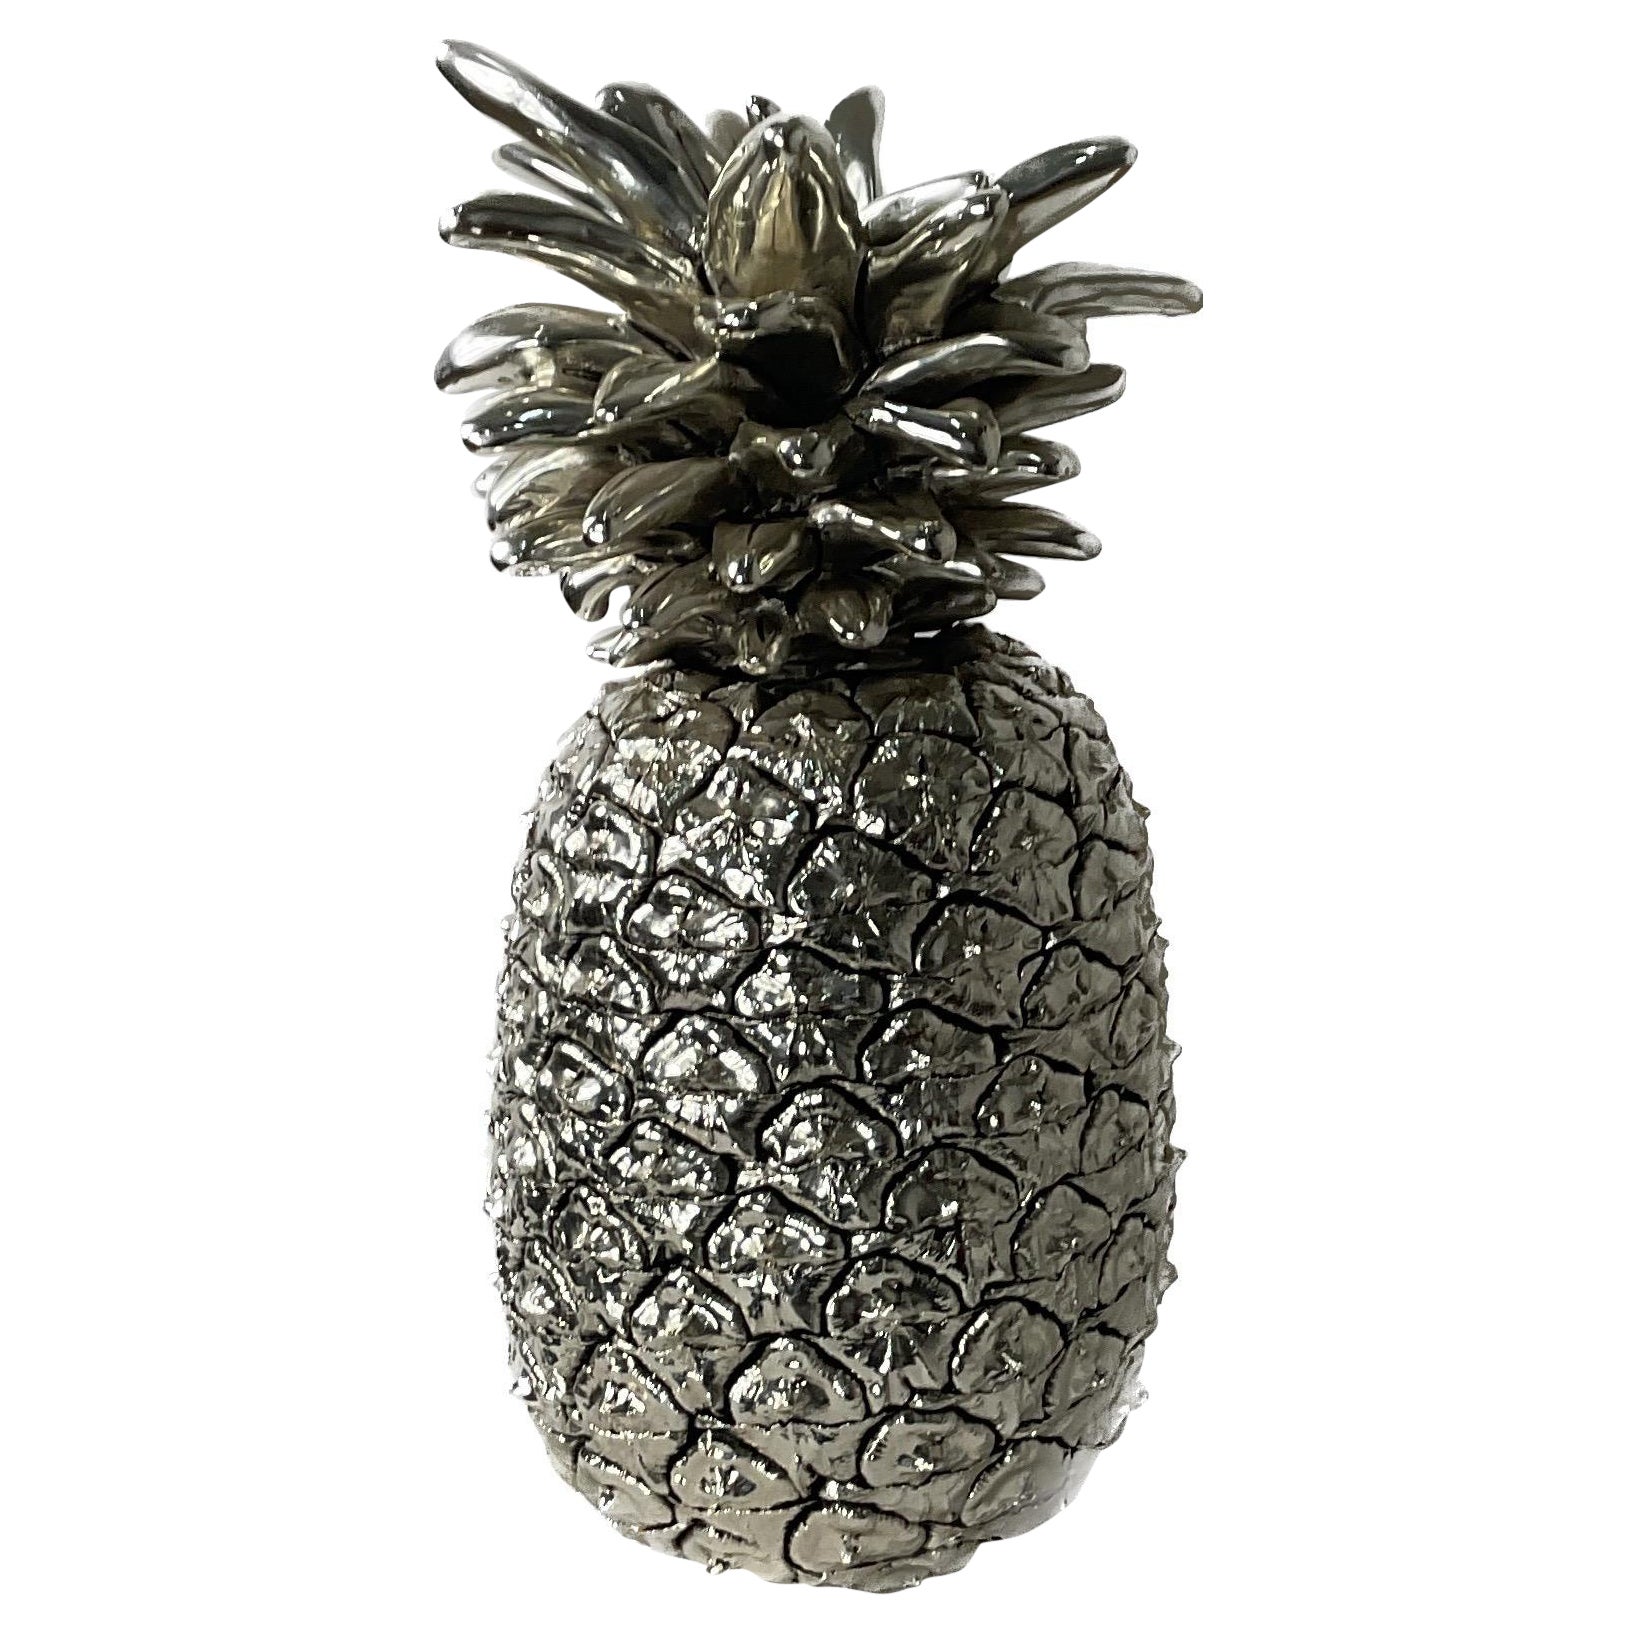 Marcello Giorgio's Silver Laminated Large Italian Pineapple from the Middle For Sale